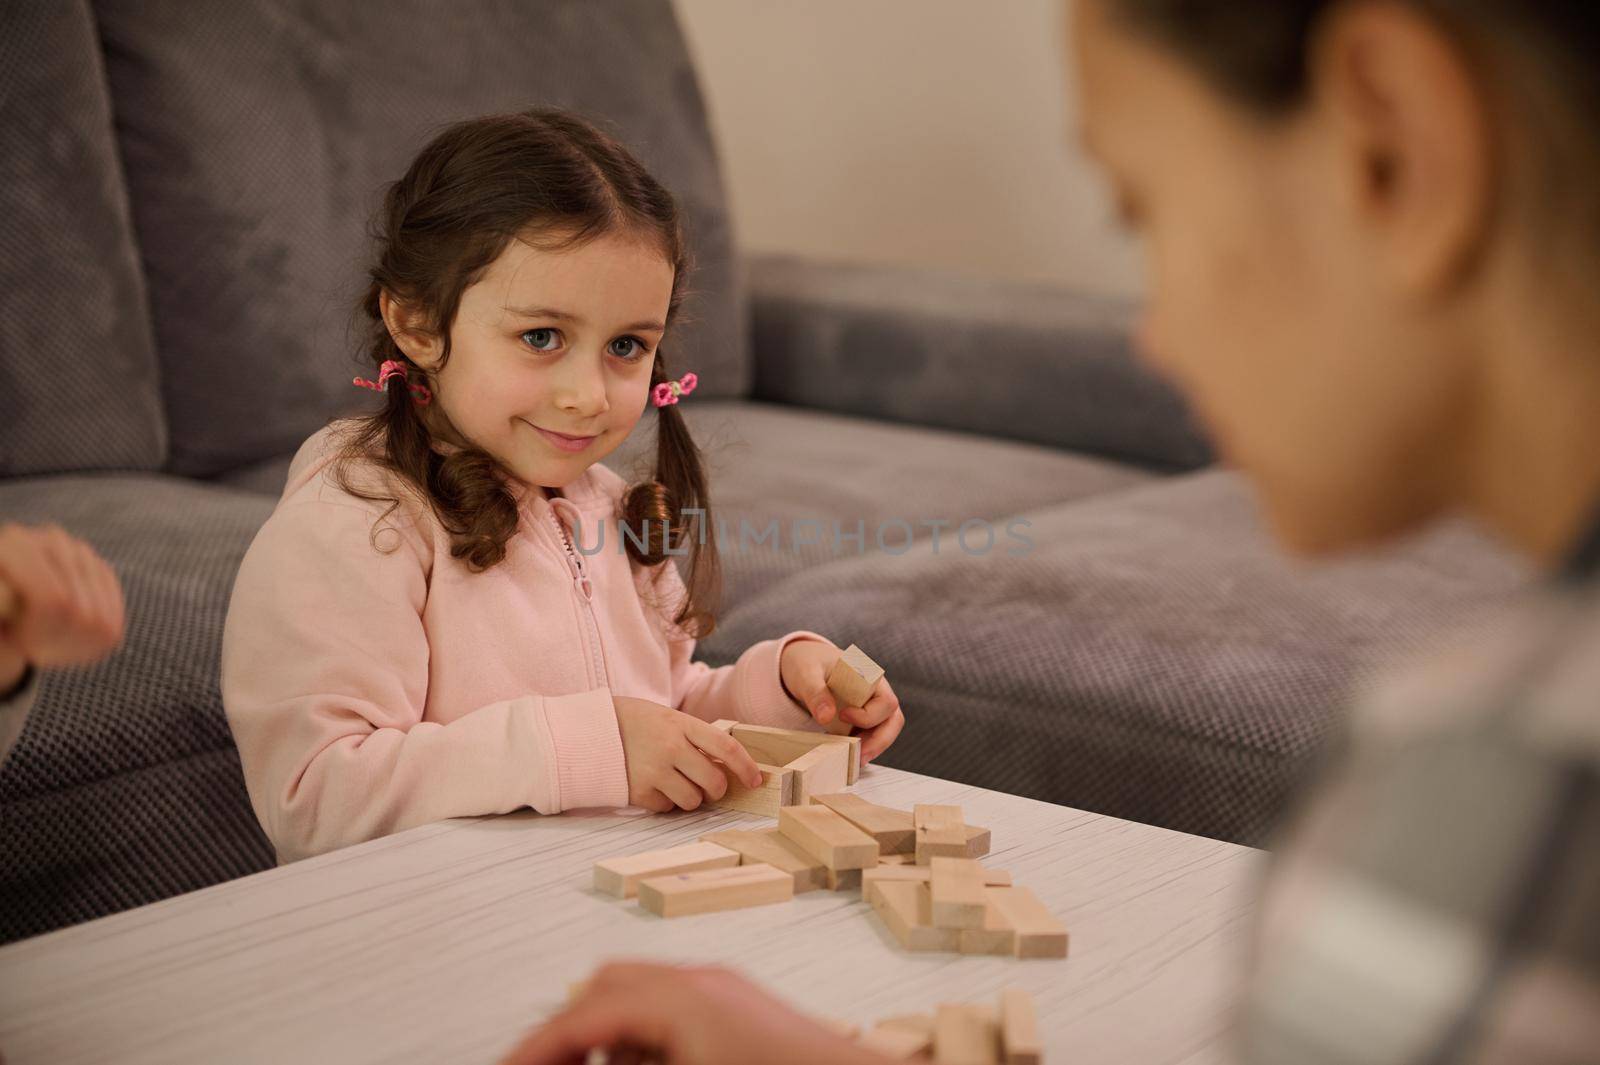 Cute baby girl in pink sweatshirt playing board game, building wooden structures with blocks, smiles looking at her mom. Family pastime, educational leisure and fine motor skills development concept by artgf